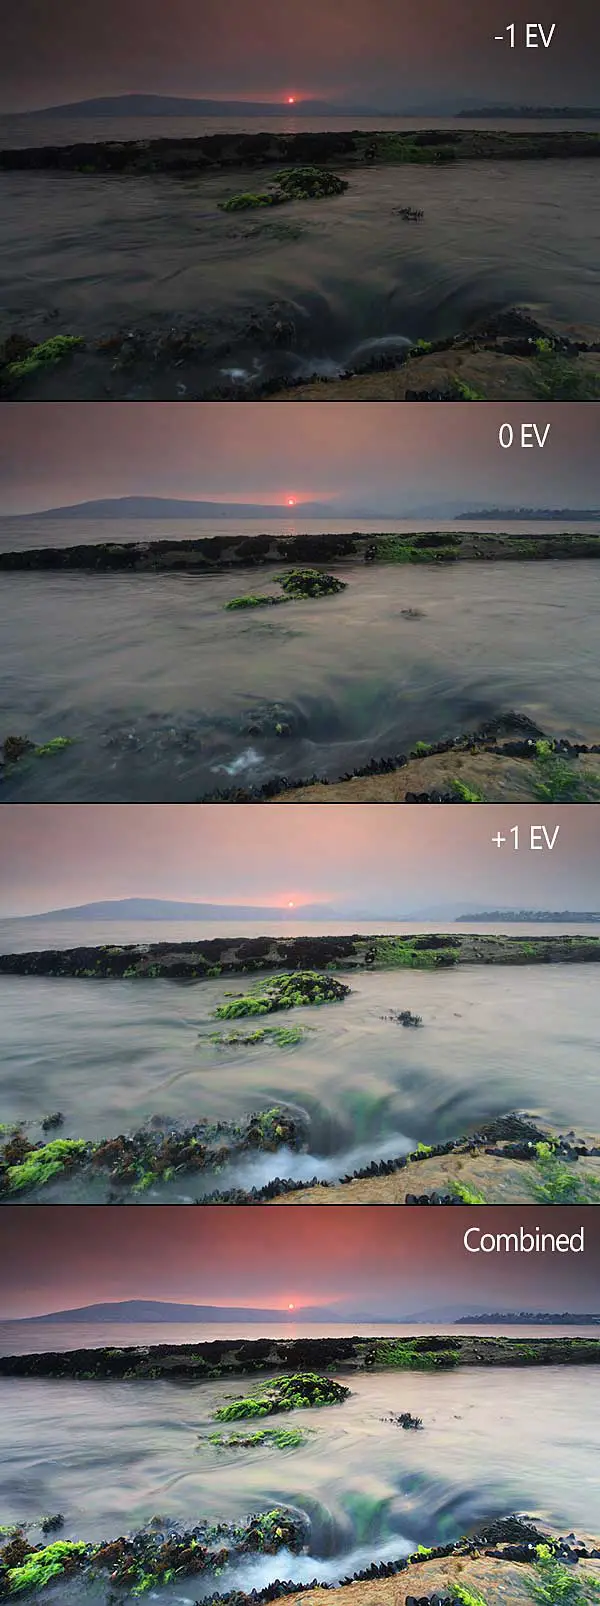 Another final image with the 3 auto exposure images and final image